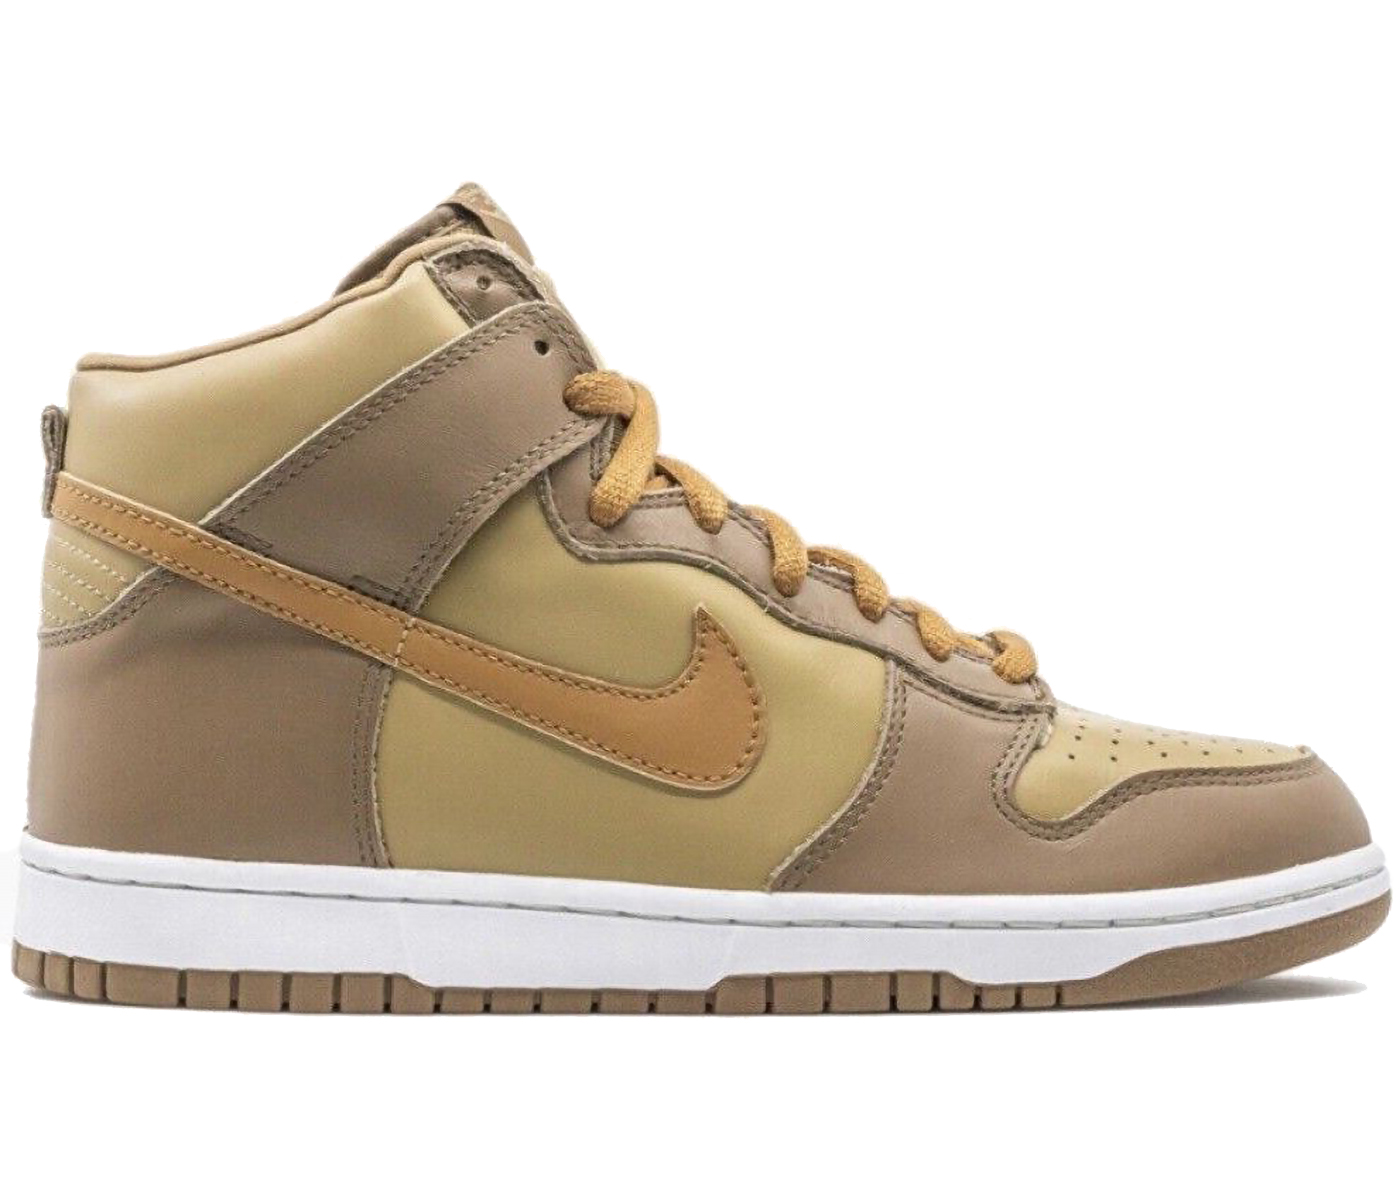 Nike Dunk High Hay Maple Taupe Men's - 304717-222 - US